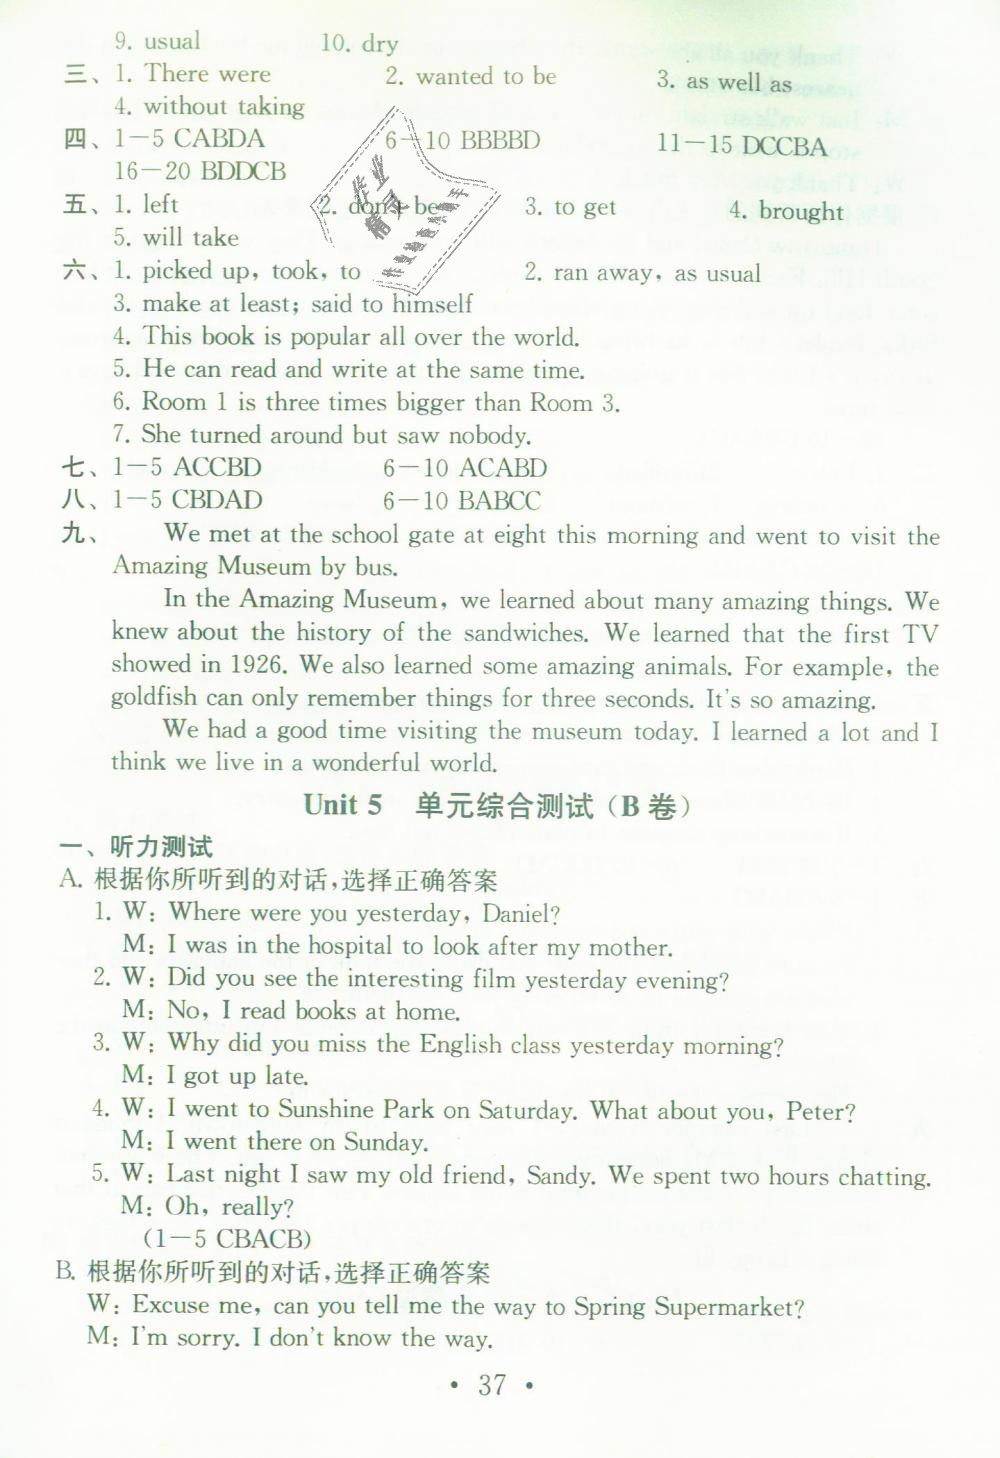 Test for Unit 5 of 7B B卷 - 第36页